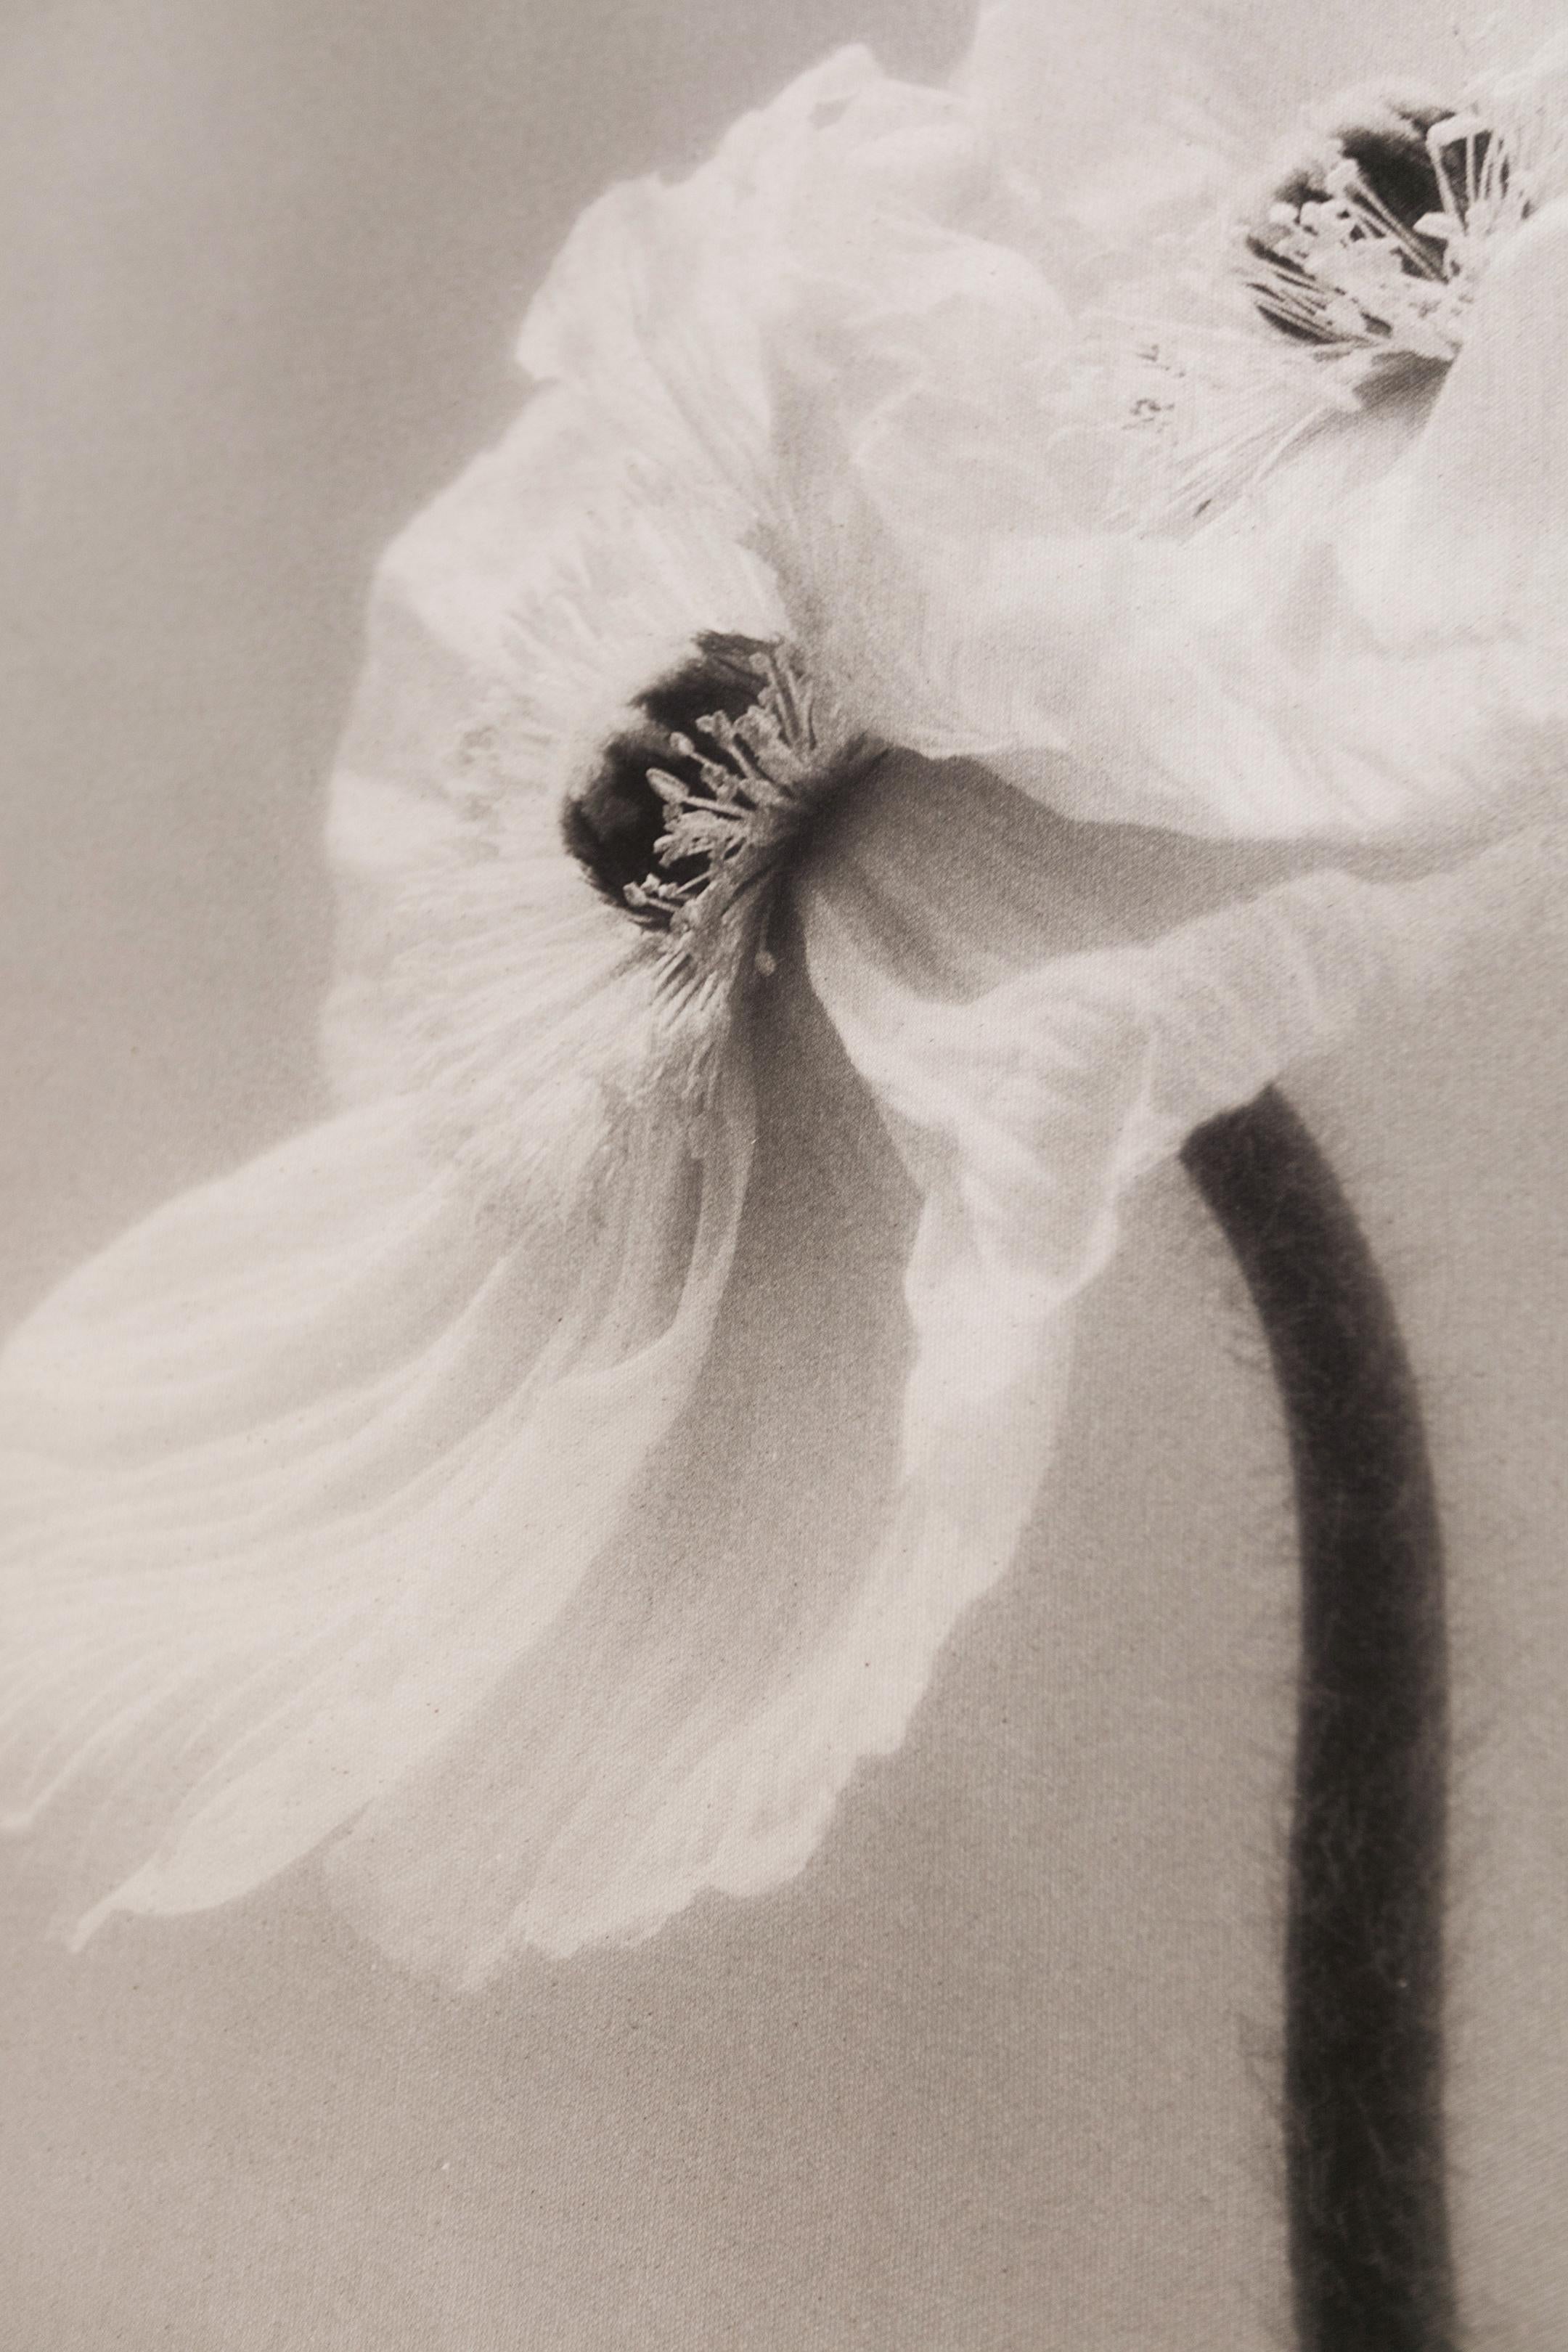 Coupled Poppies - organic cotton canvas scroll on bamboo, limited edition 3 of 5 - Photograph by Ugne Pouwell